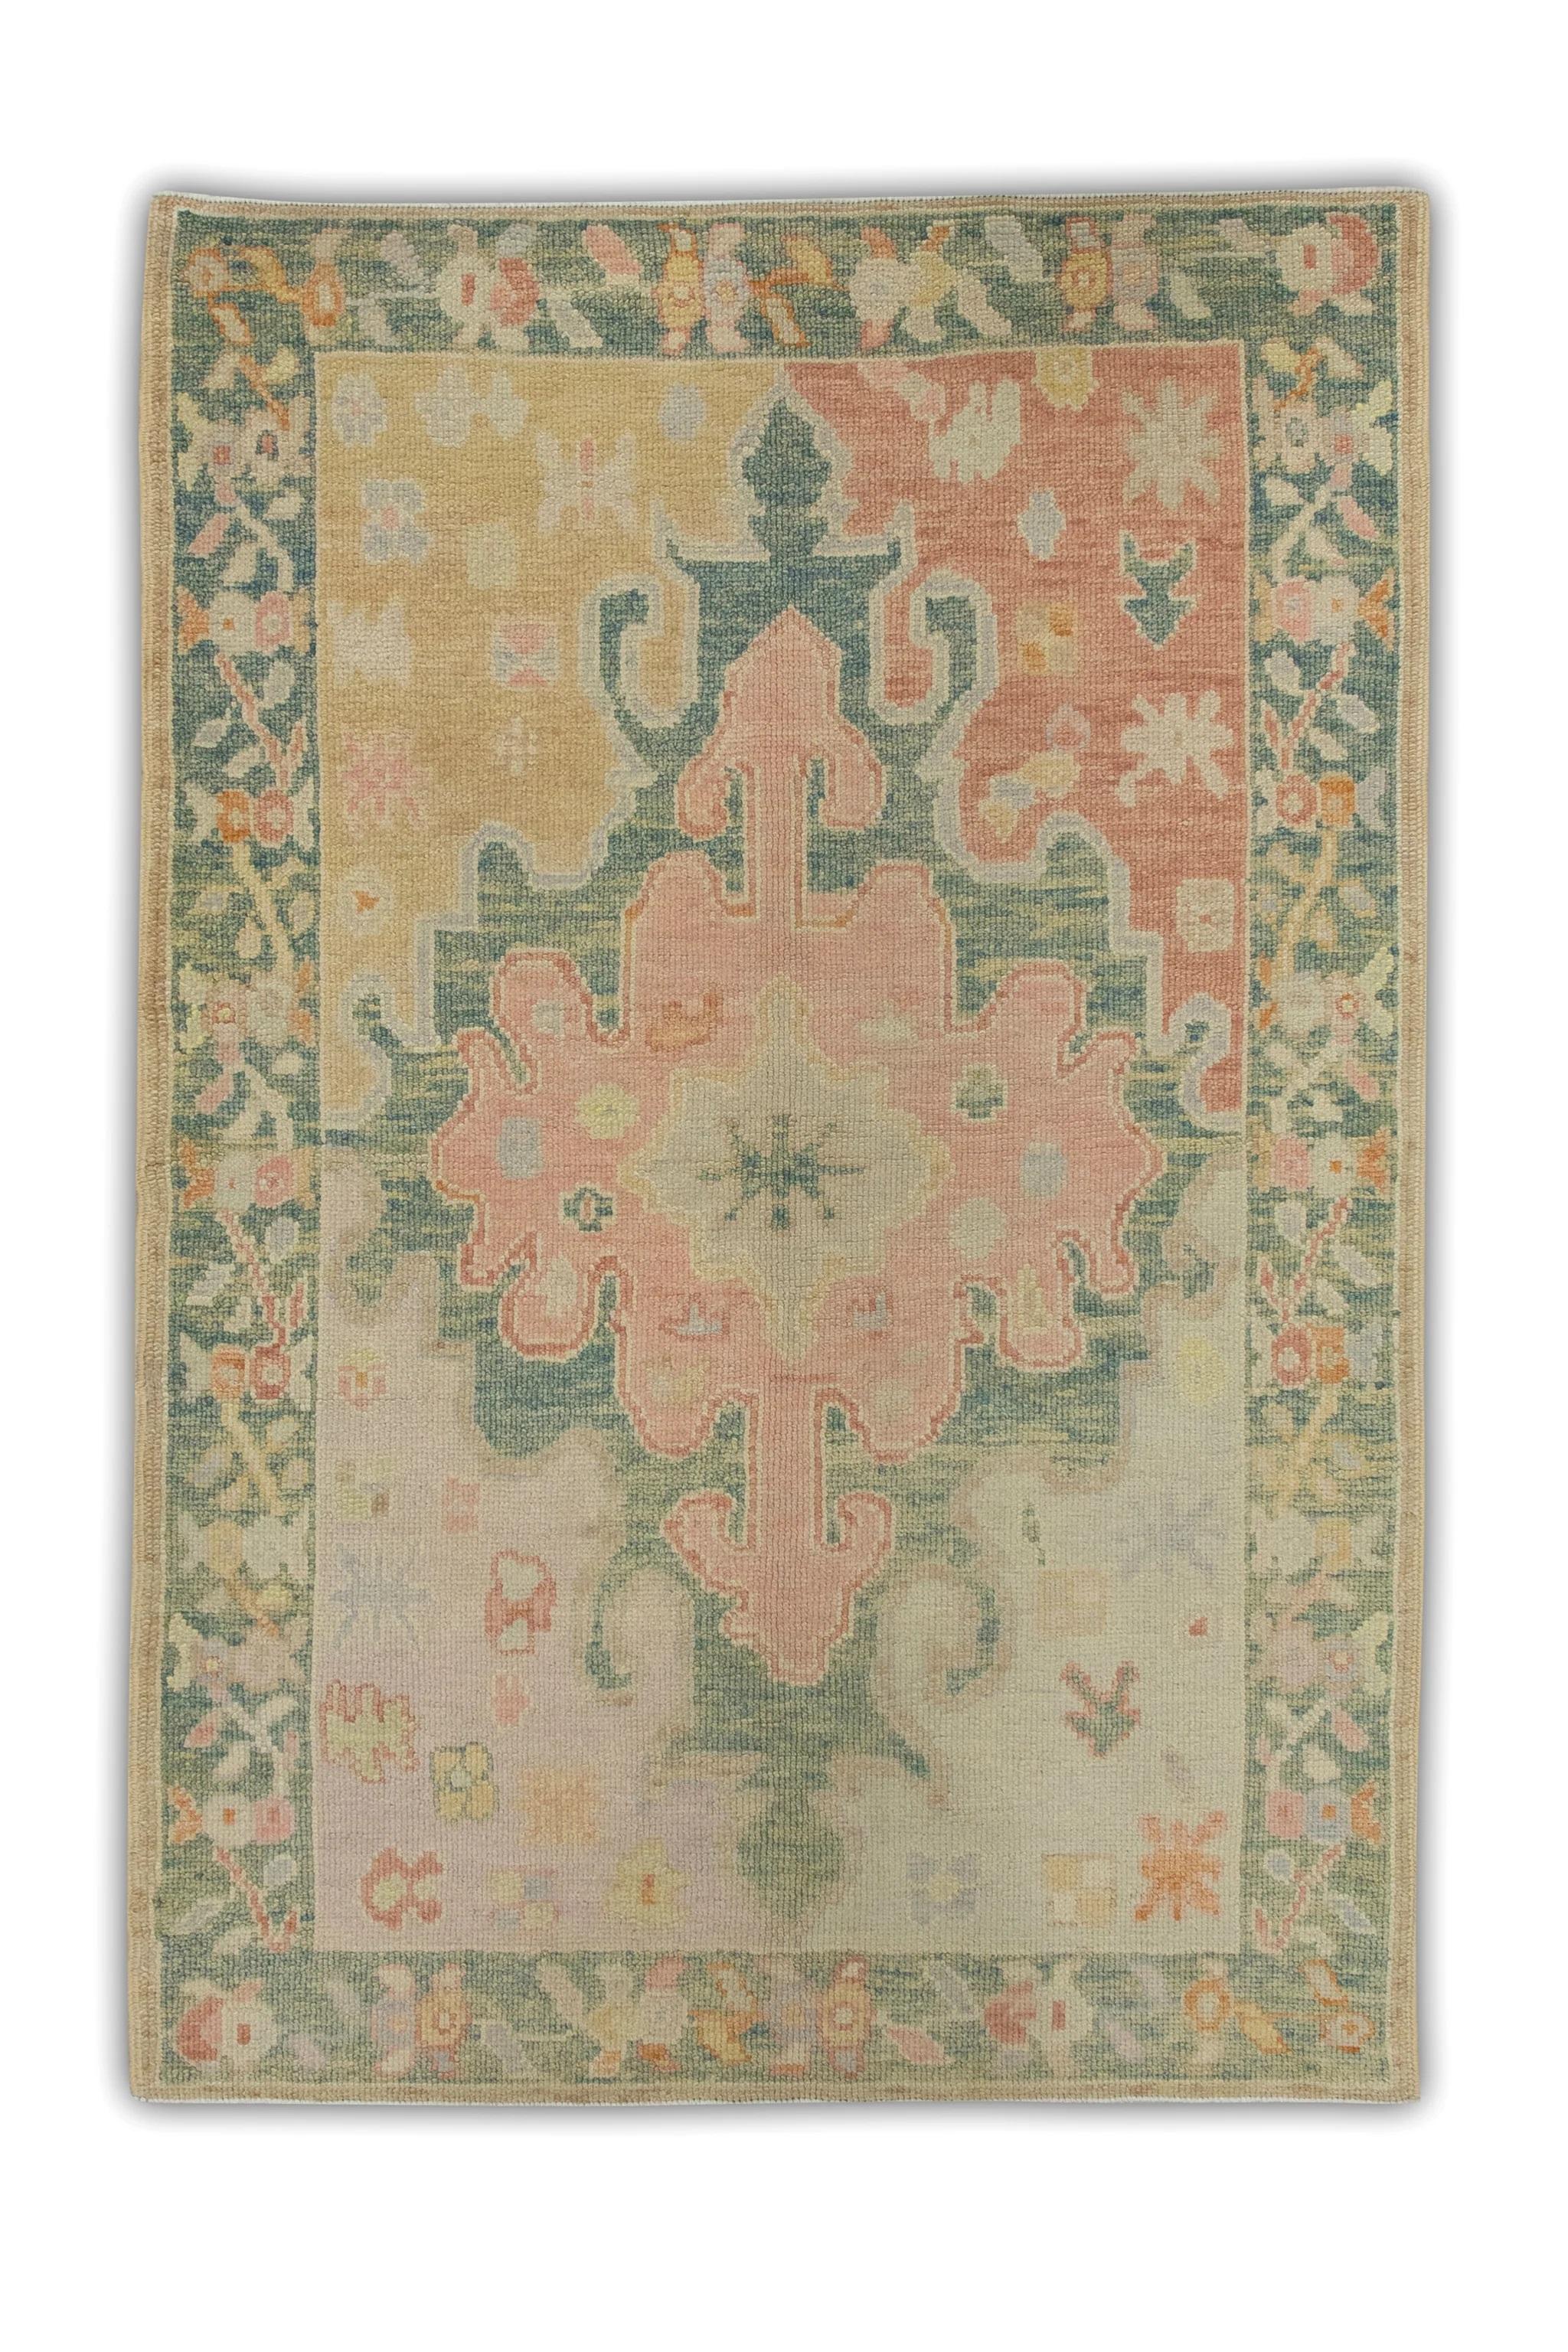 Contemporary Green and Pink Floral Handwoven Wool Turkish Oushak Rug 4'1